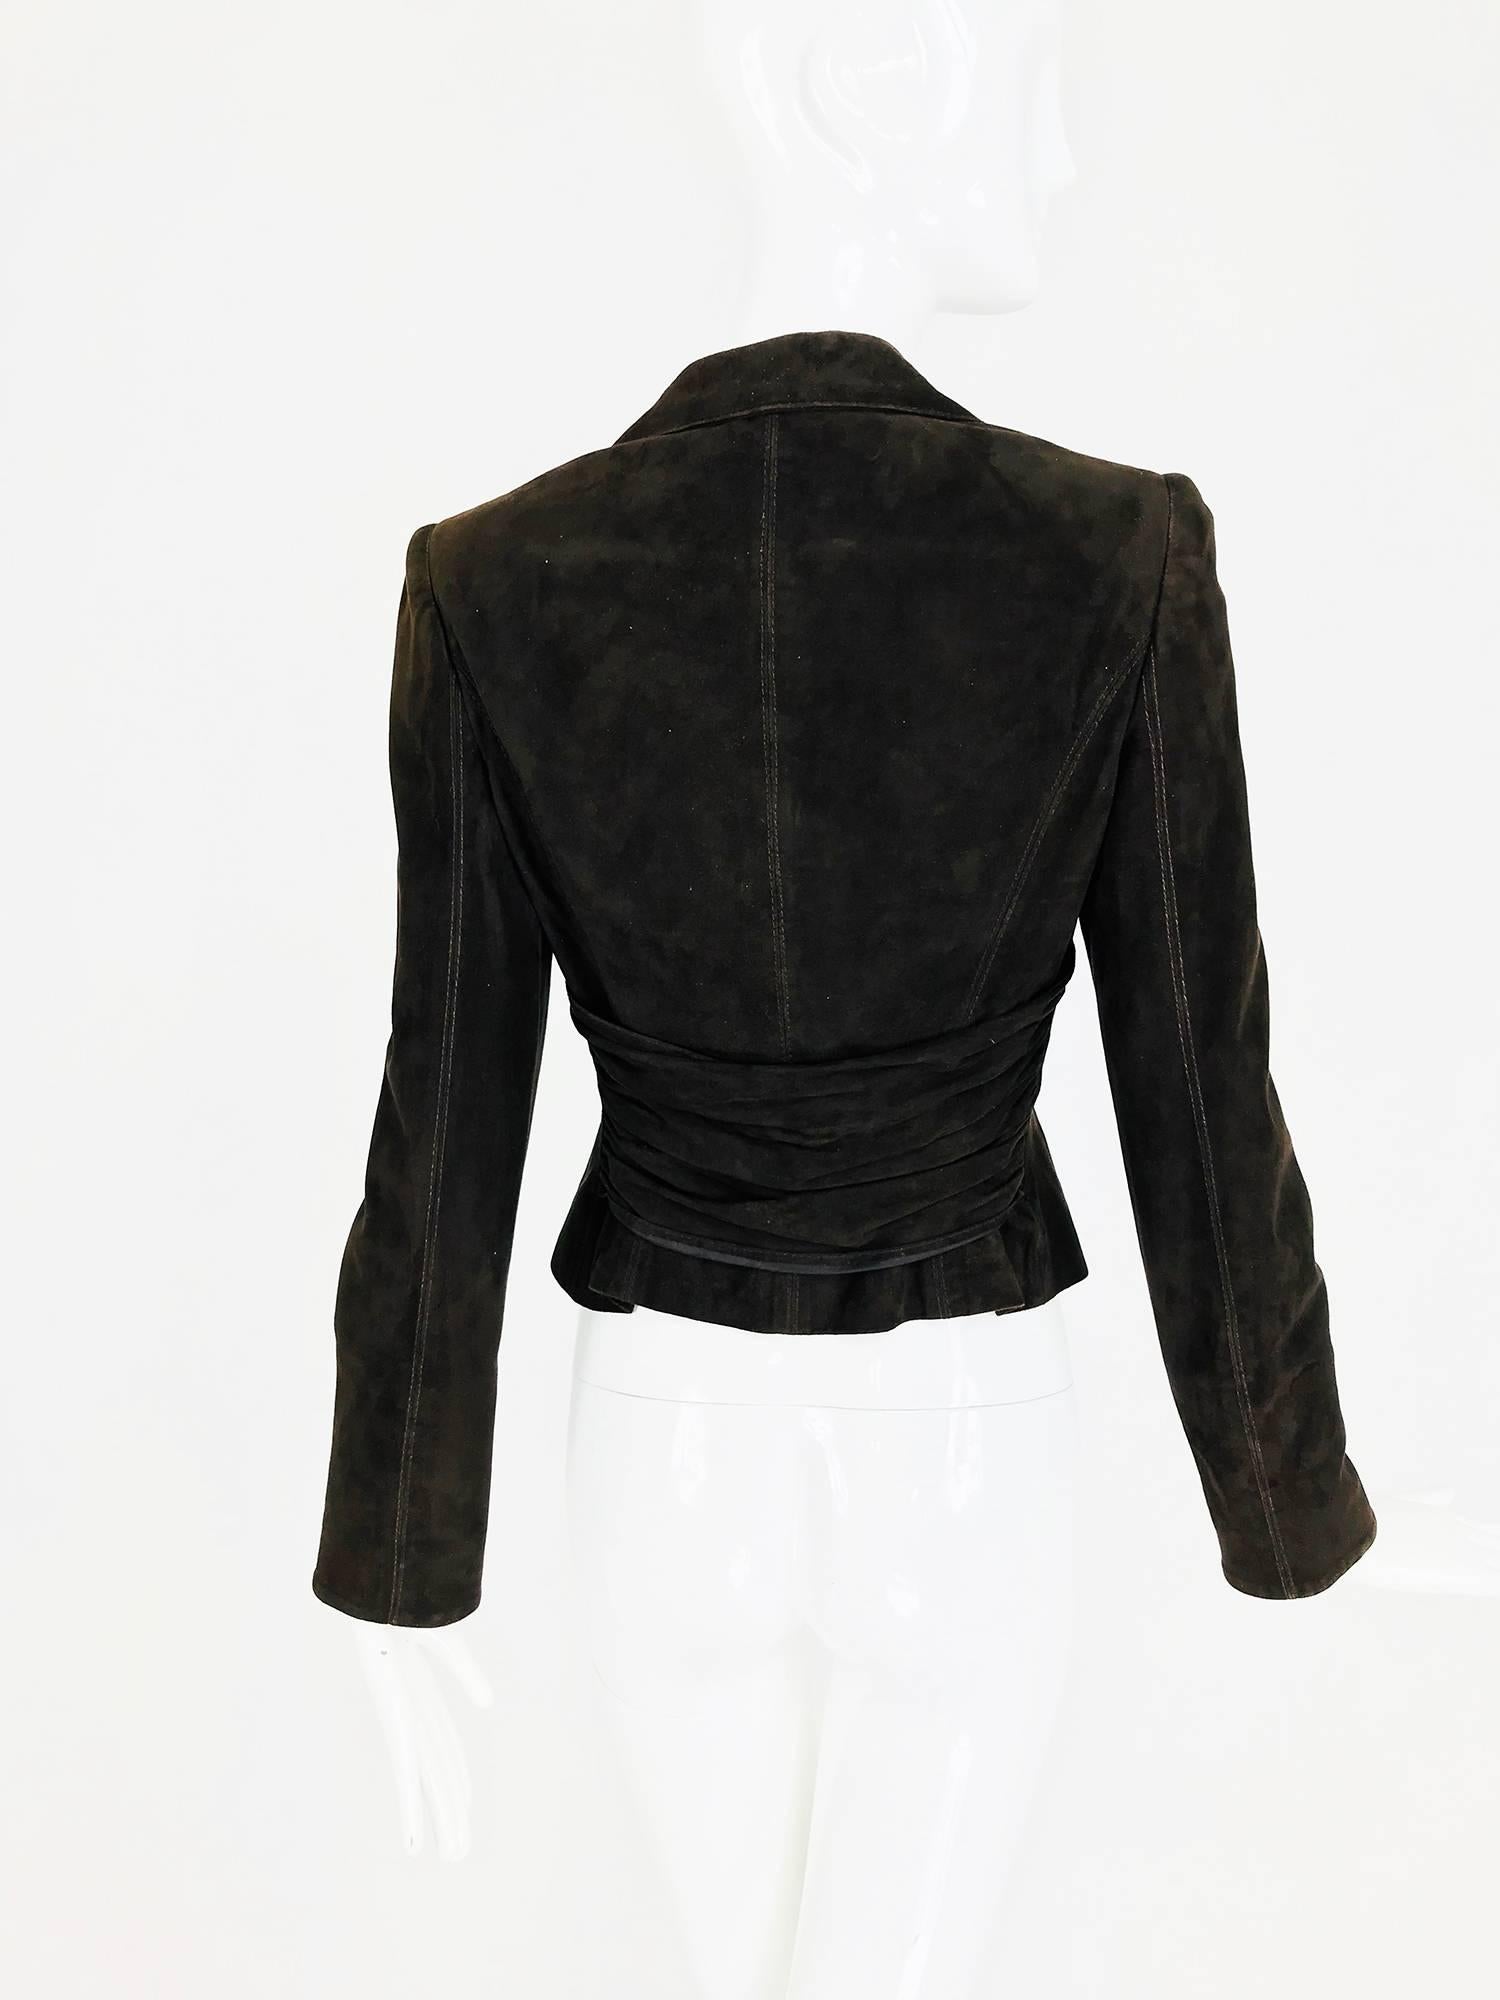 Valentino Chocolate brown top stitched suede jacket For Sale 2